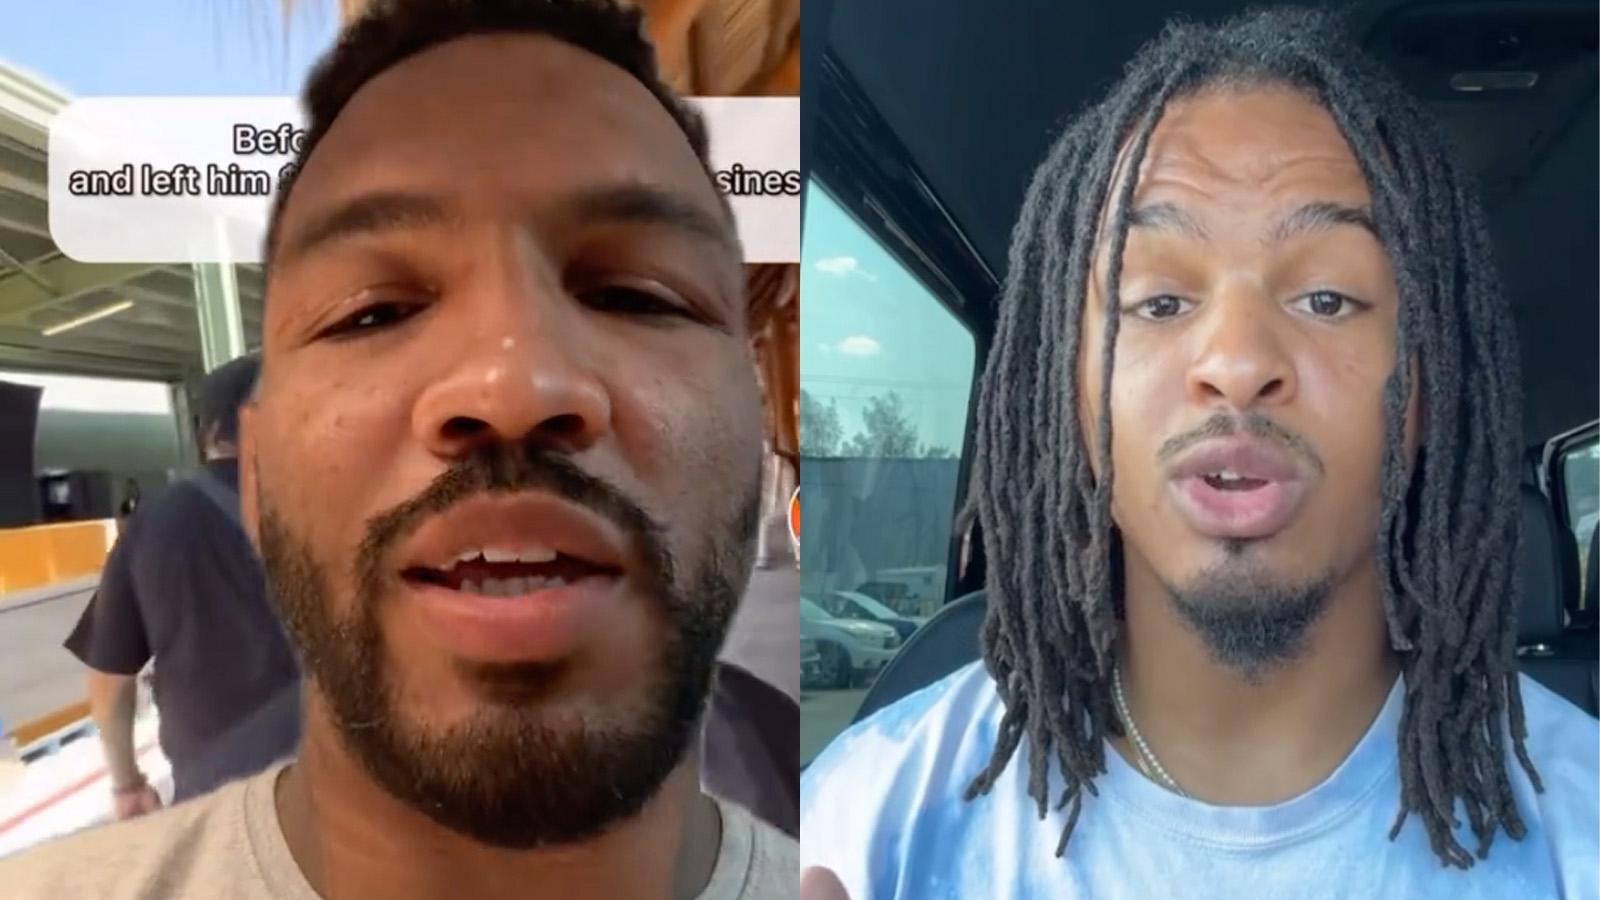 Kevin Lee responds to Keith Lee review of his food